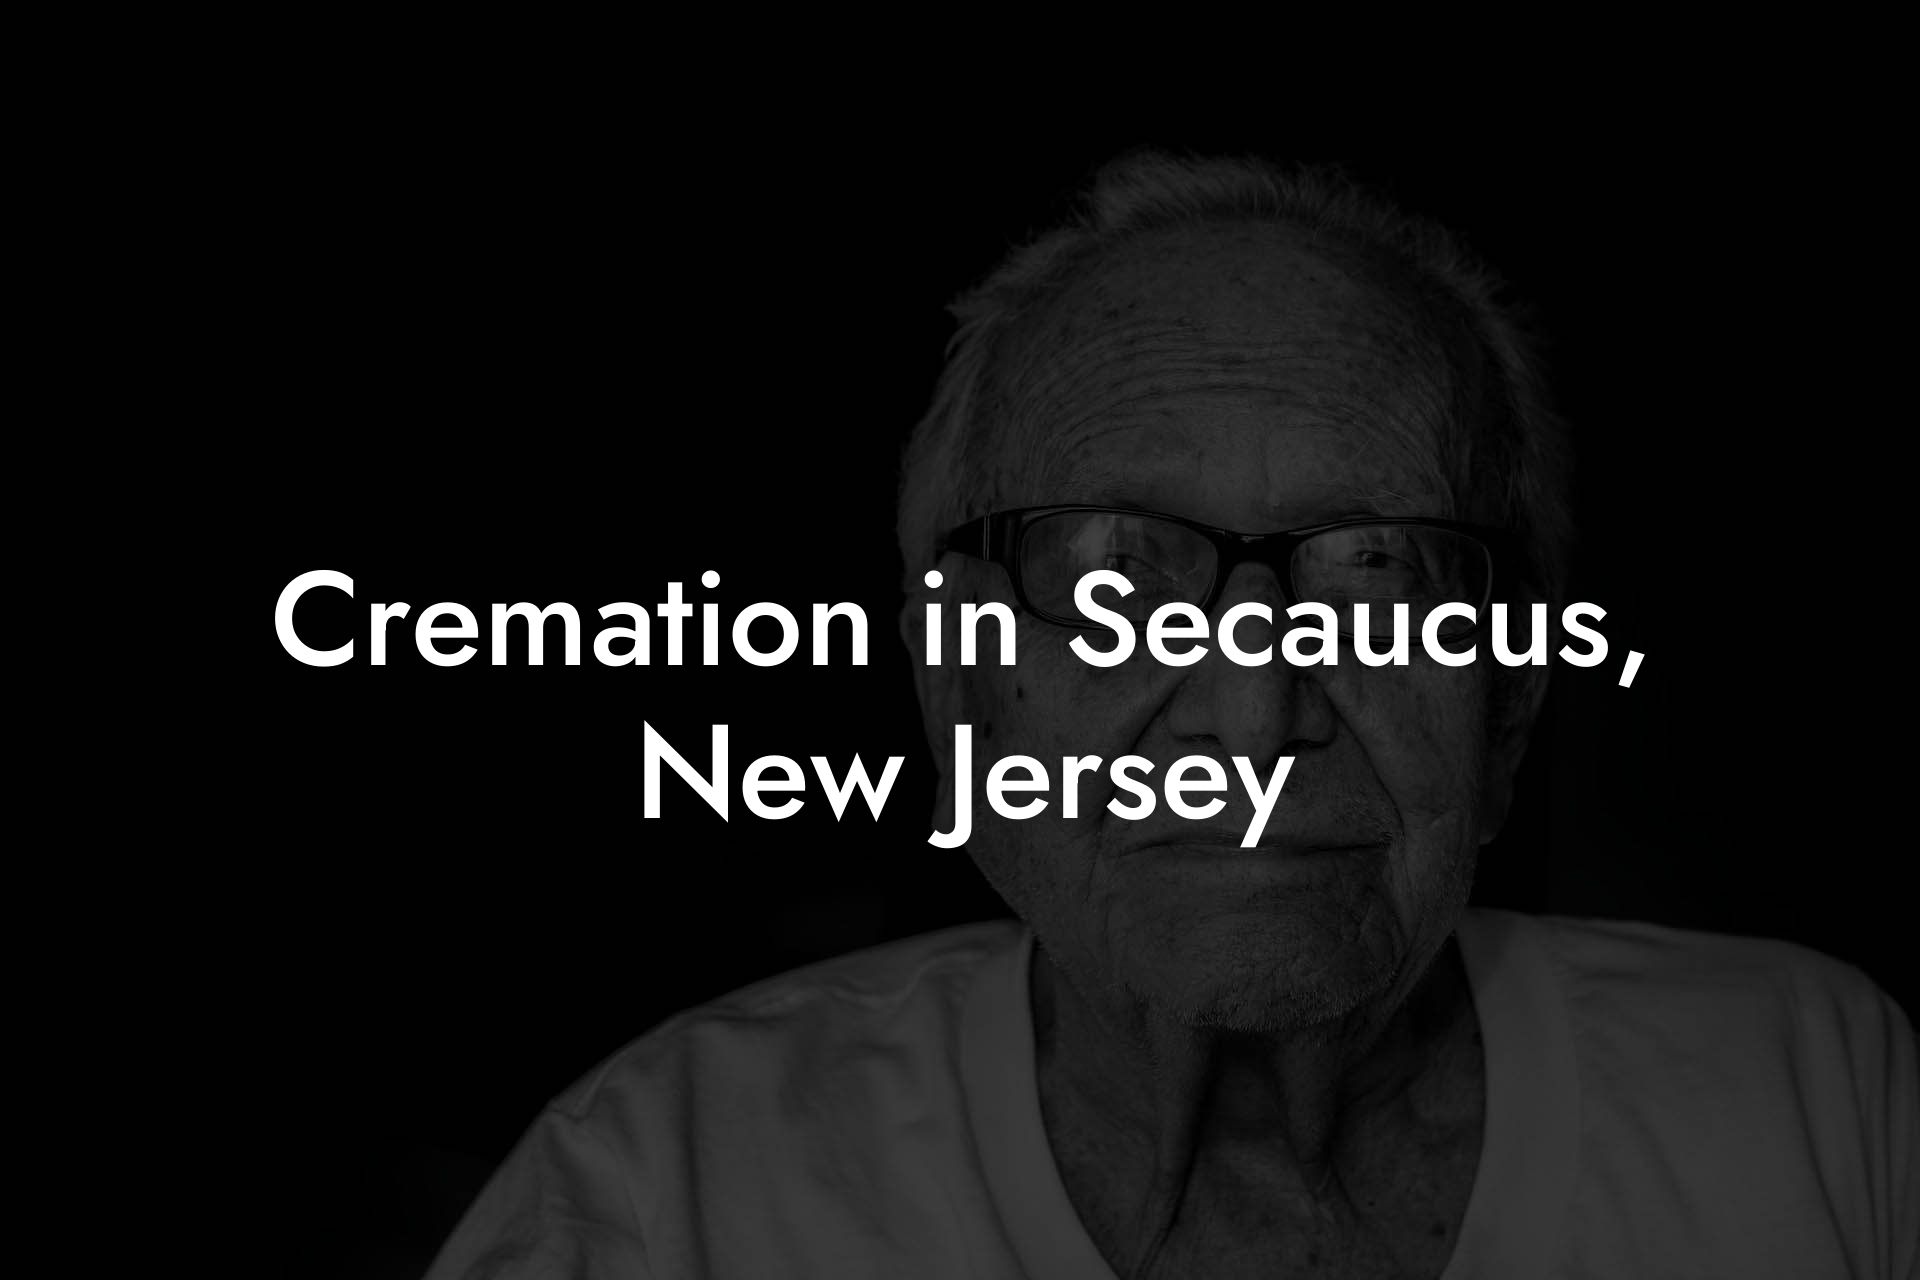 Cremation in Secaucus, New Jersey